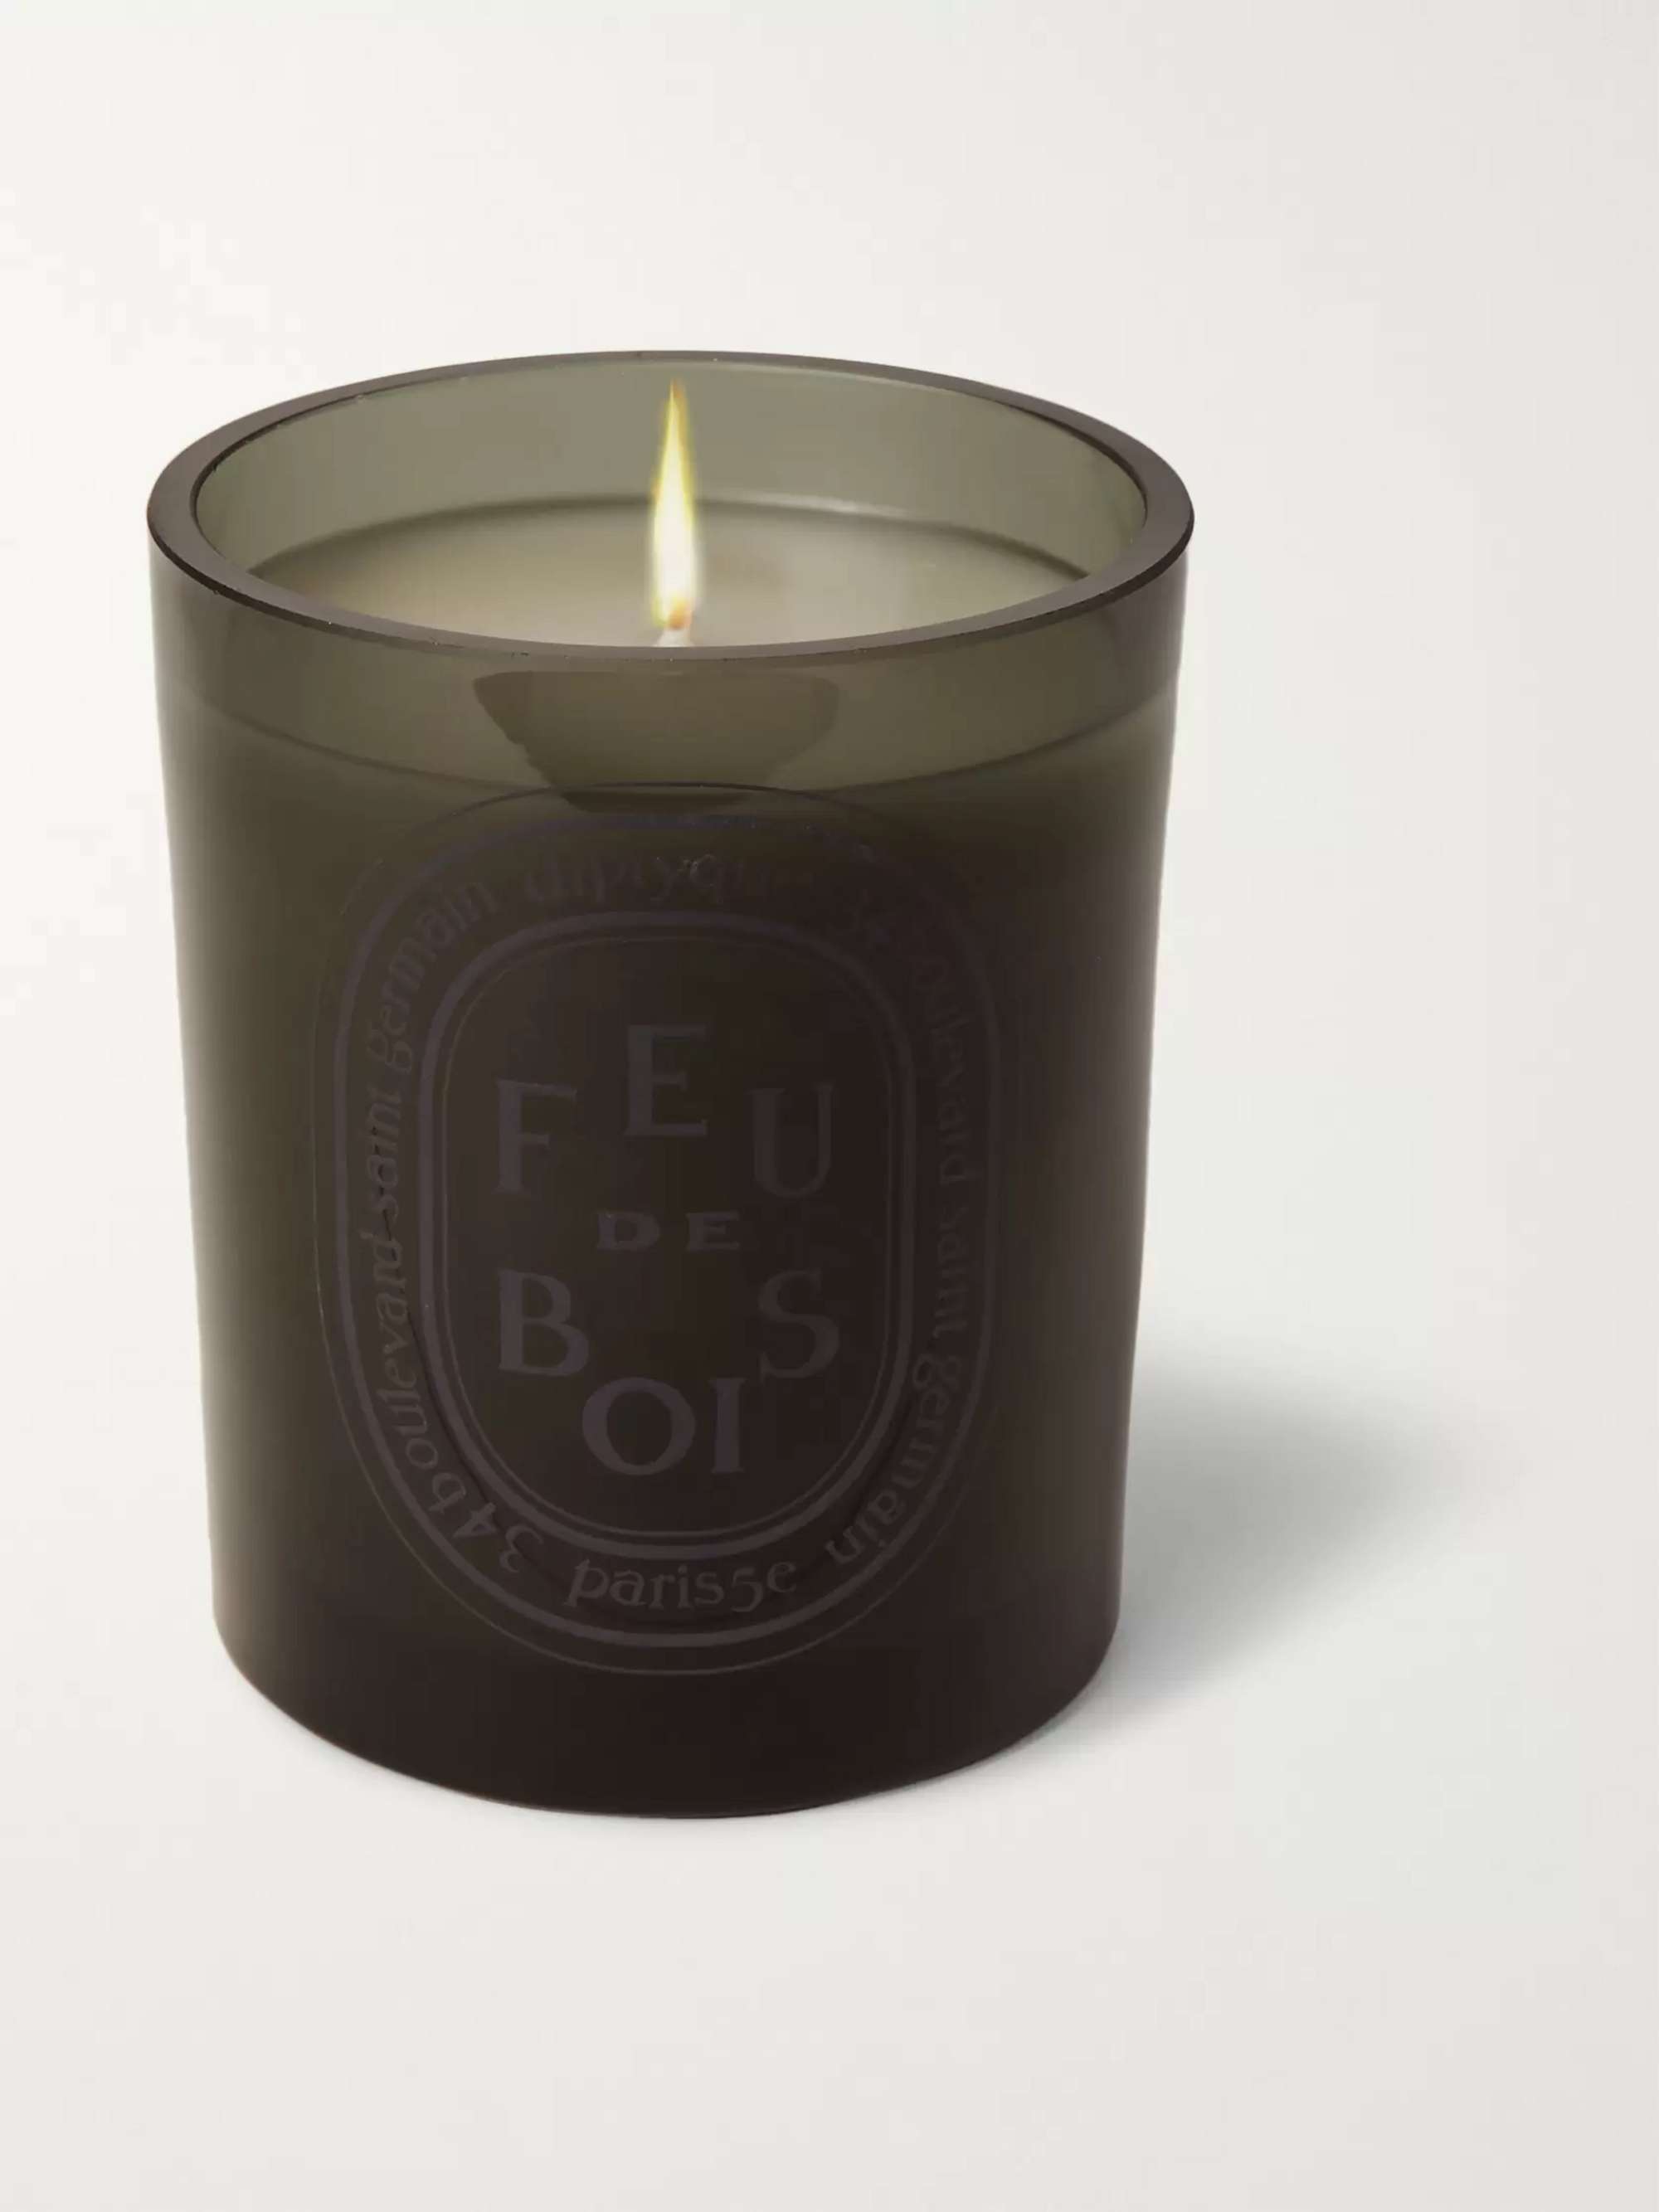 DIPTYQUE Black Baies Scented Candle, 300g